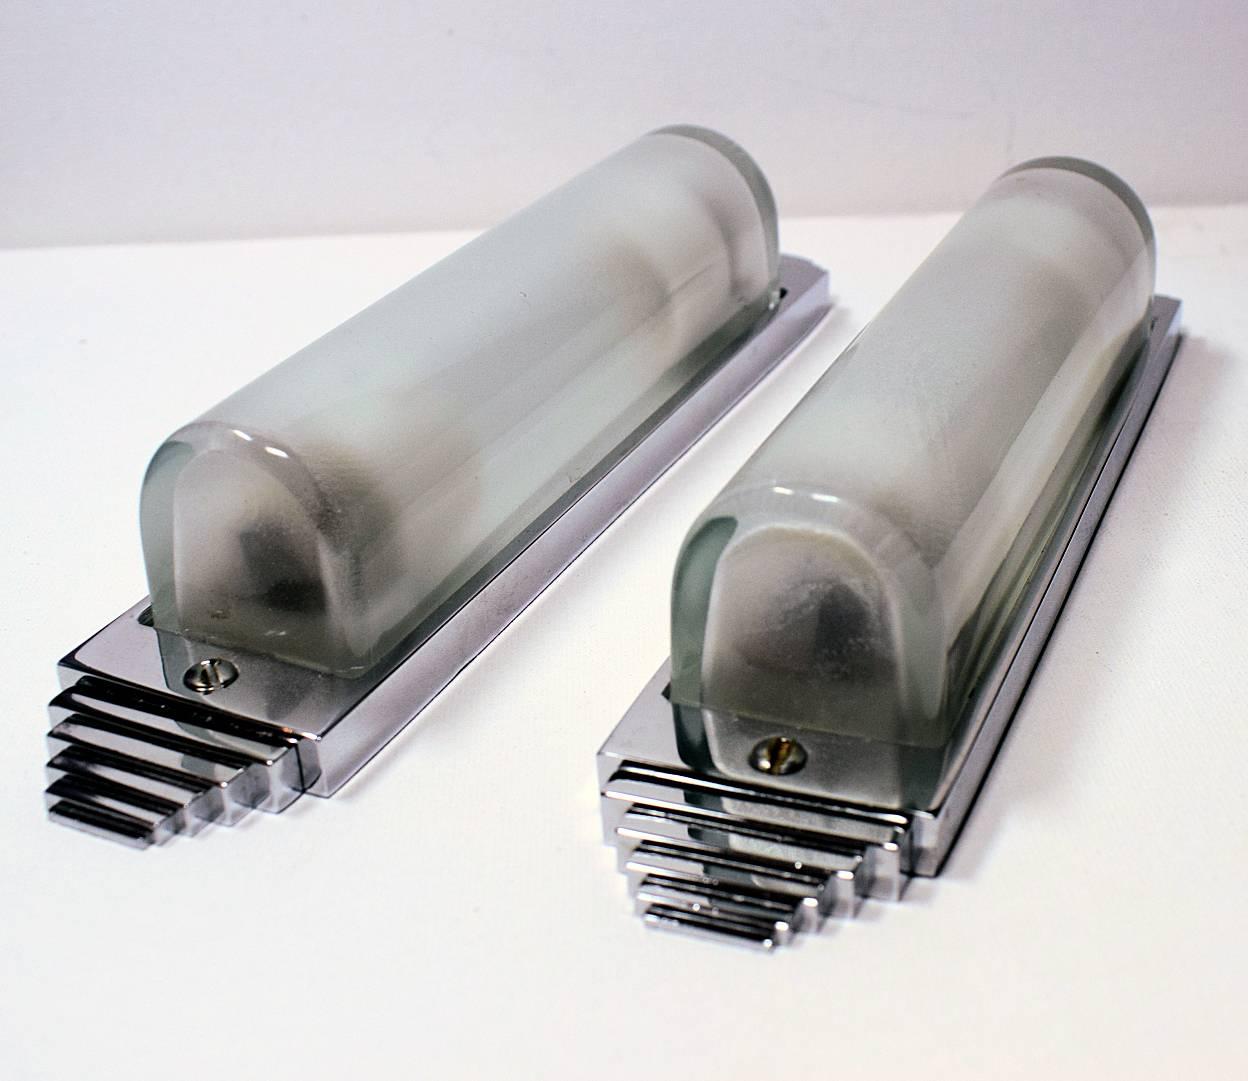 For your consideration is this English modernist Art Deco pair of matching wall lights. Ideal for bathrooms, hallways or any where that needs framing with some glamorous lighting. Totally authentic and to the period and in excellent condition with